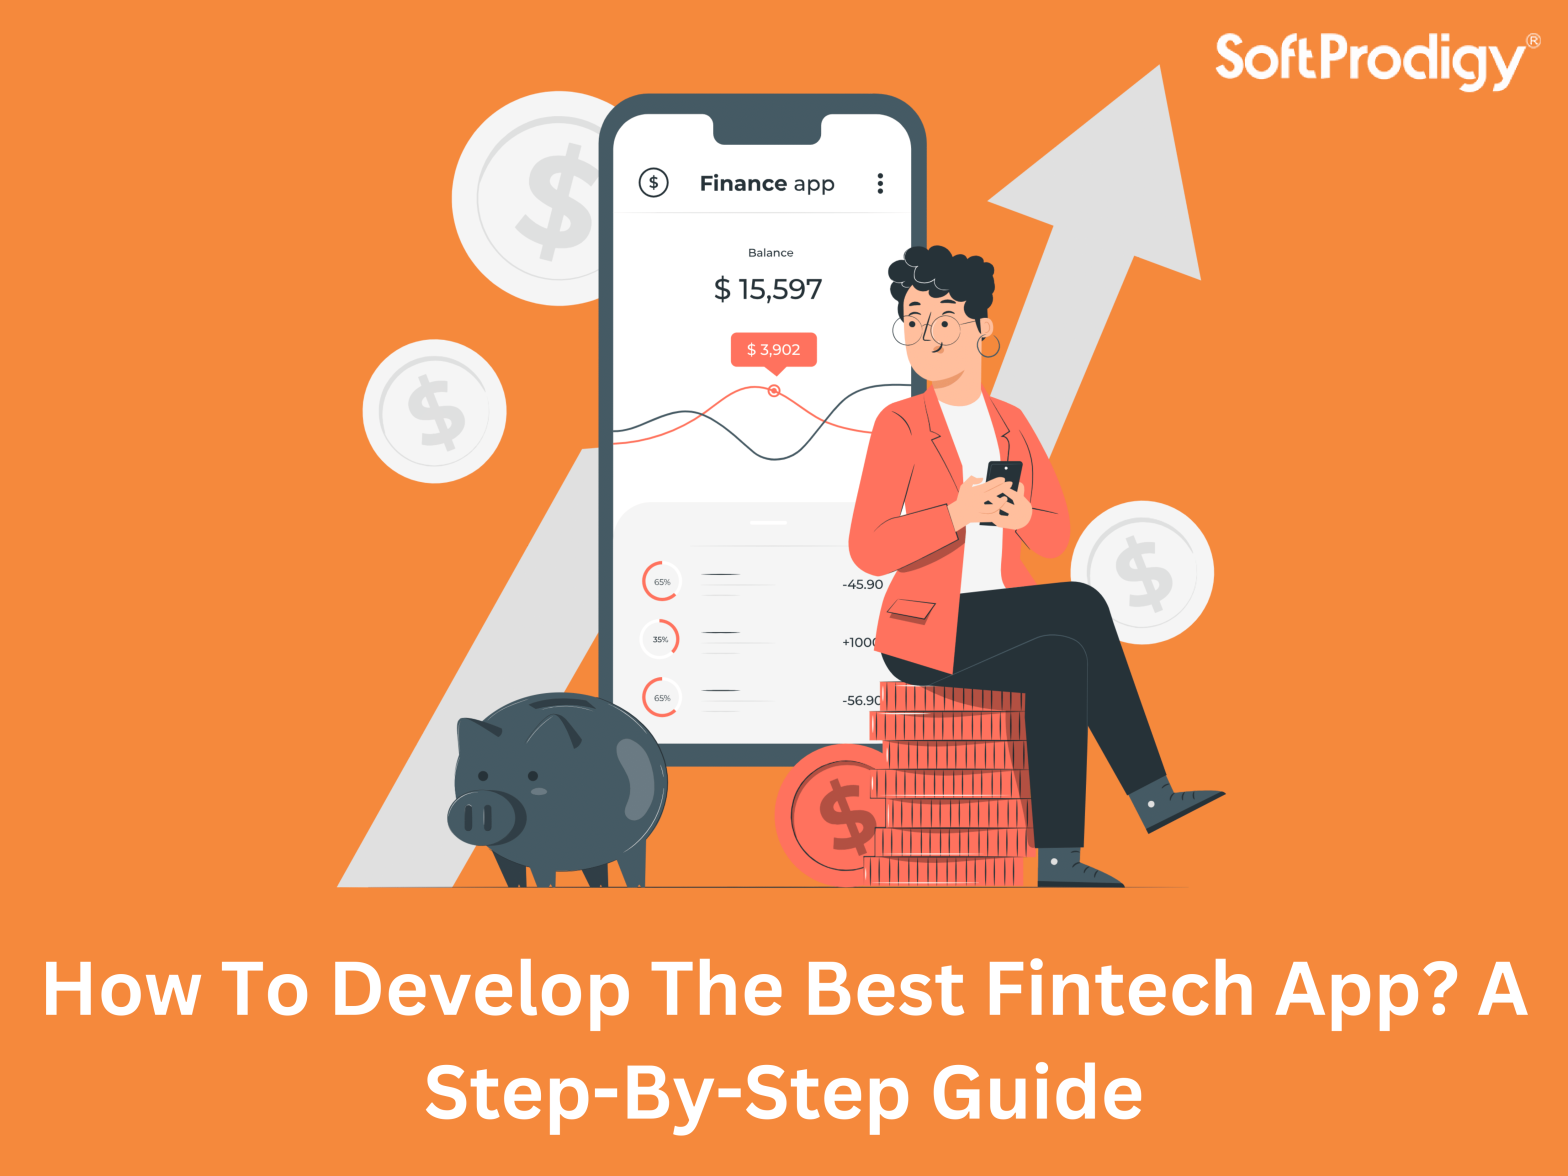 How To Develop The Best Fintech App? A Step-By-Step Guide